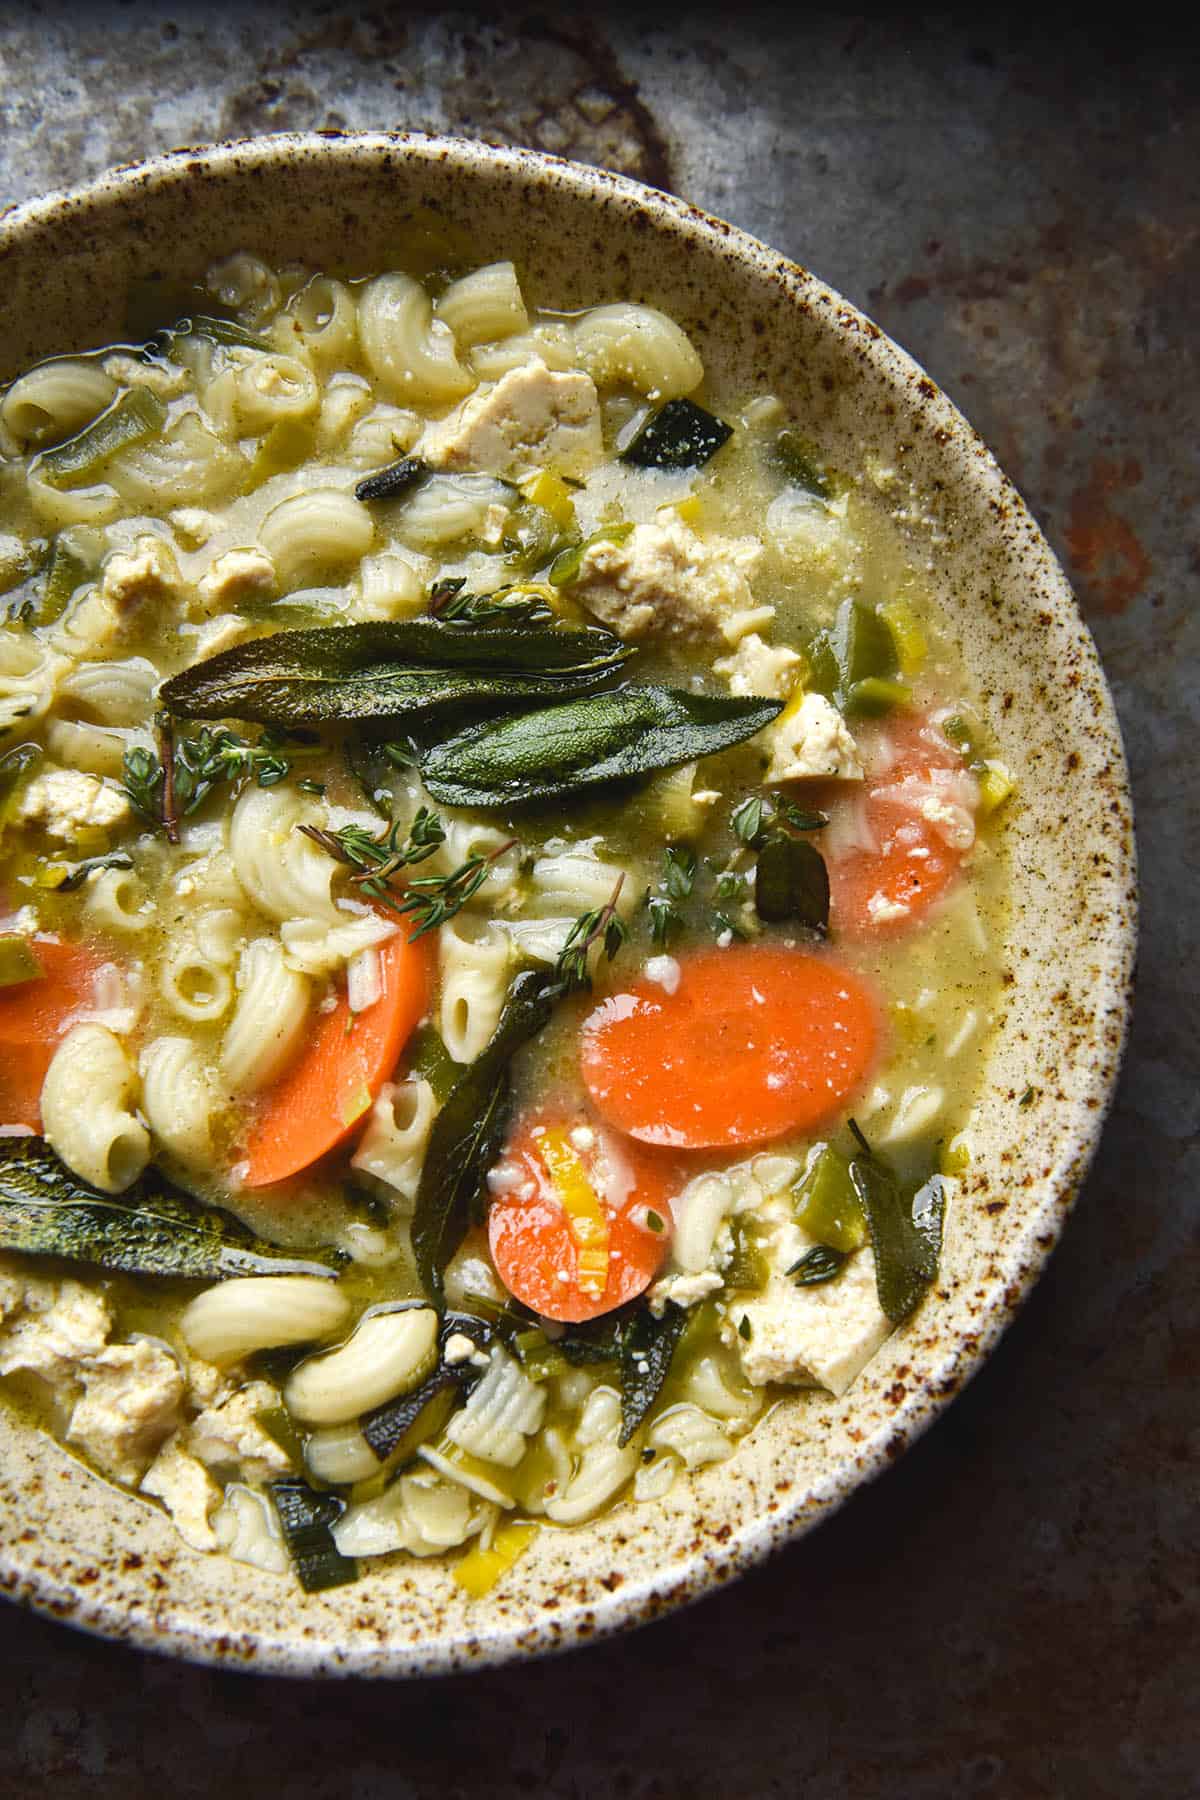 An aerial close up view of a speckled beige ceramic bowl filled with vegan chicken noodle soup. Carrots, tofu cubes and pasta peek out from the broth, which is topped with crispy sage leaves, parmesan and truffle oil